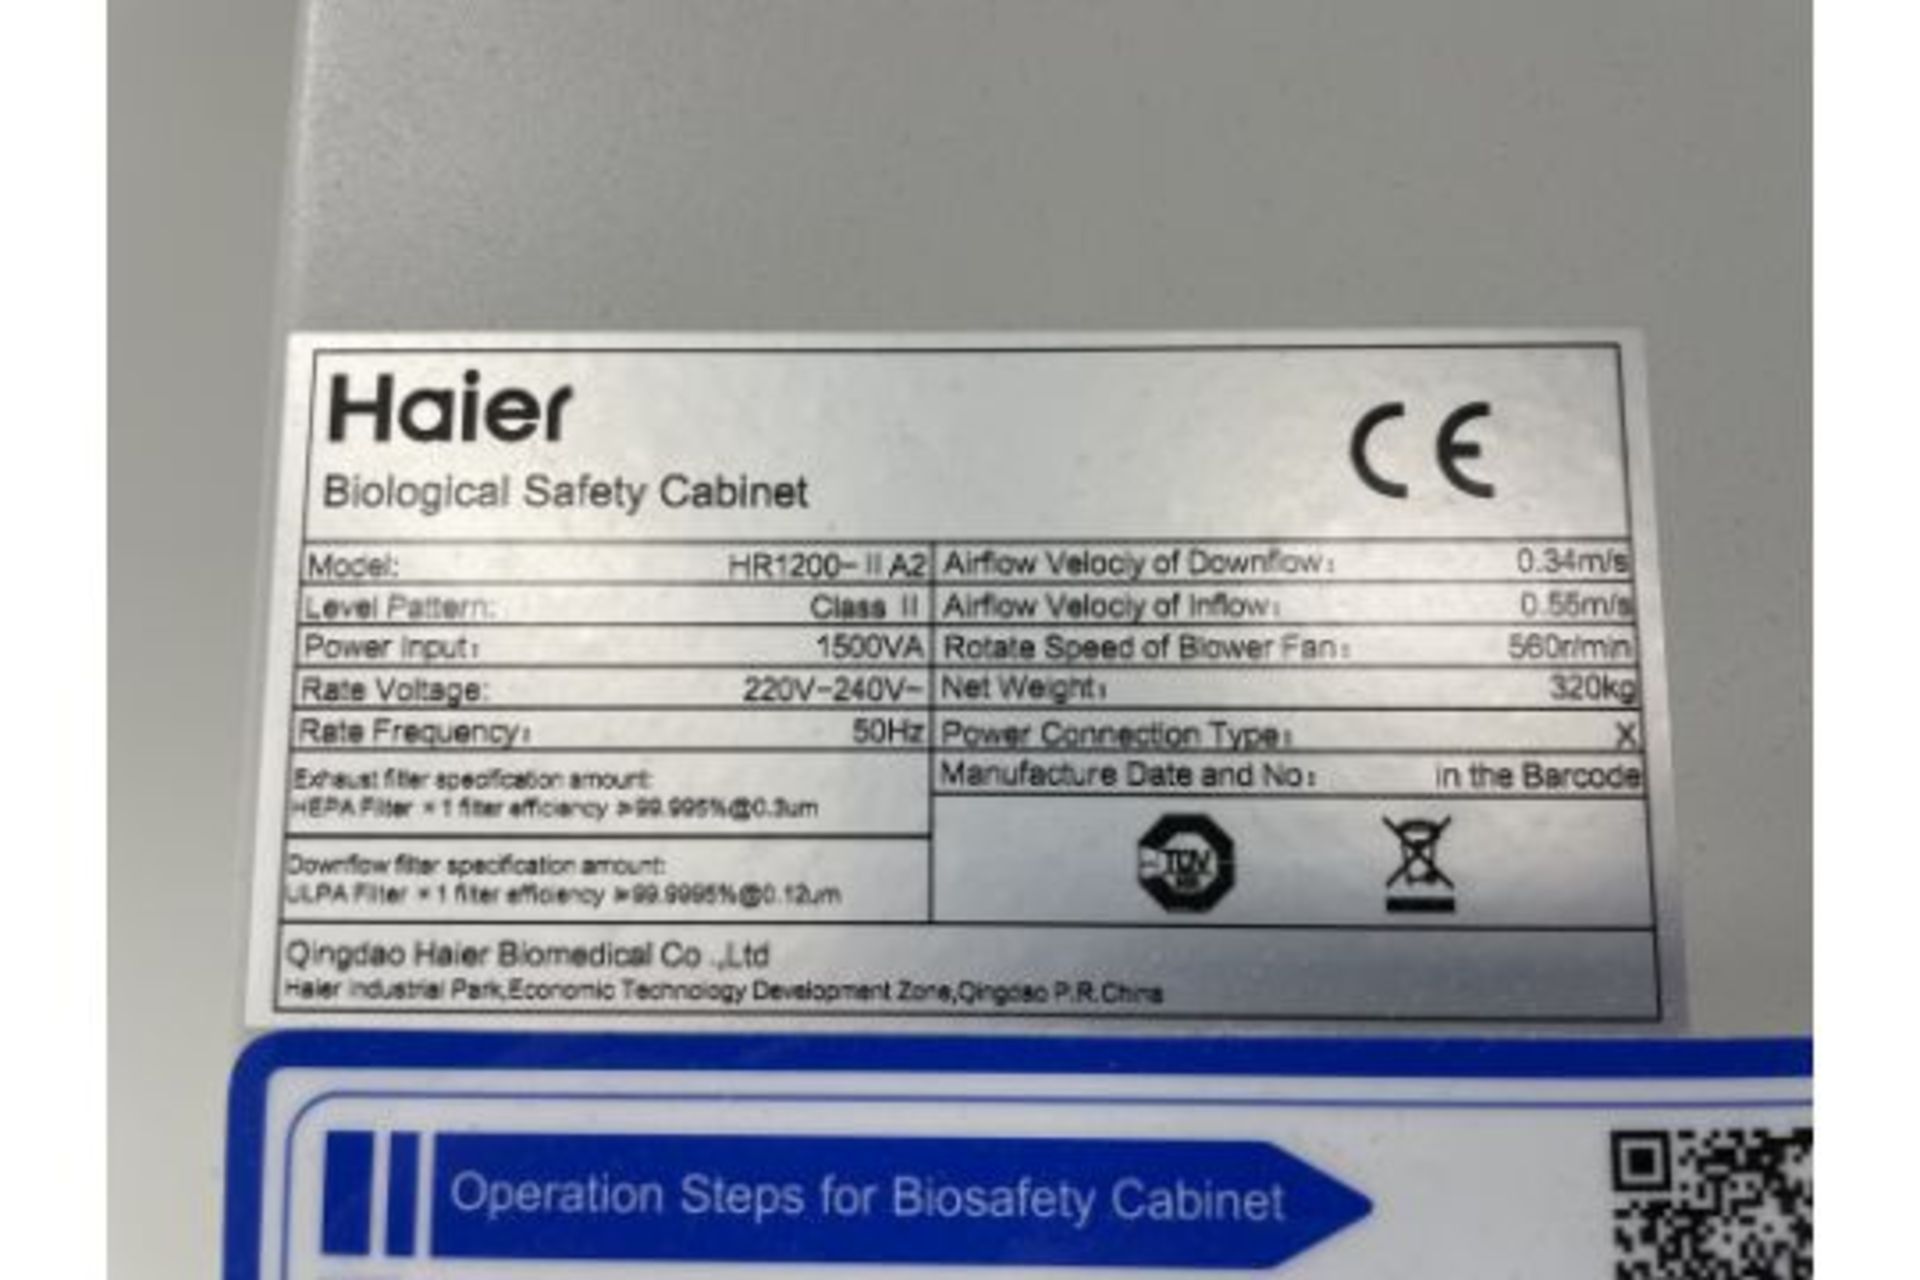 HAIER BIOMEDICAL HR1200-IIA2 BIOLOGICAL SAFETY CABINET - Image 3 of 3